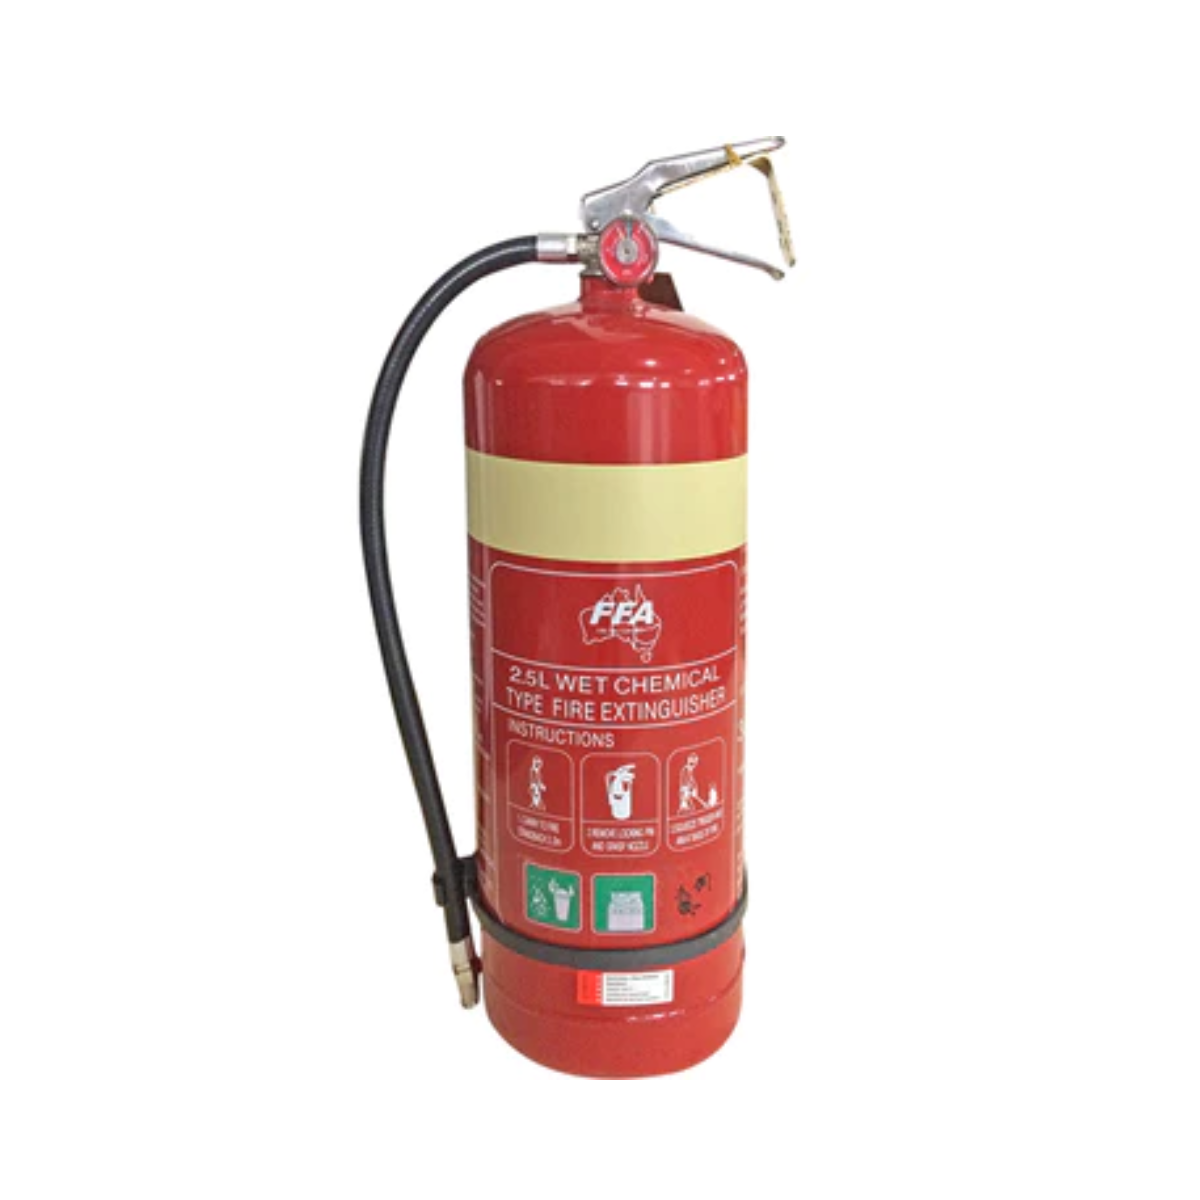 Wet Chemical Fire Extinguisher - 2.5L